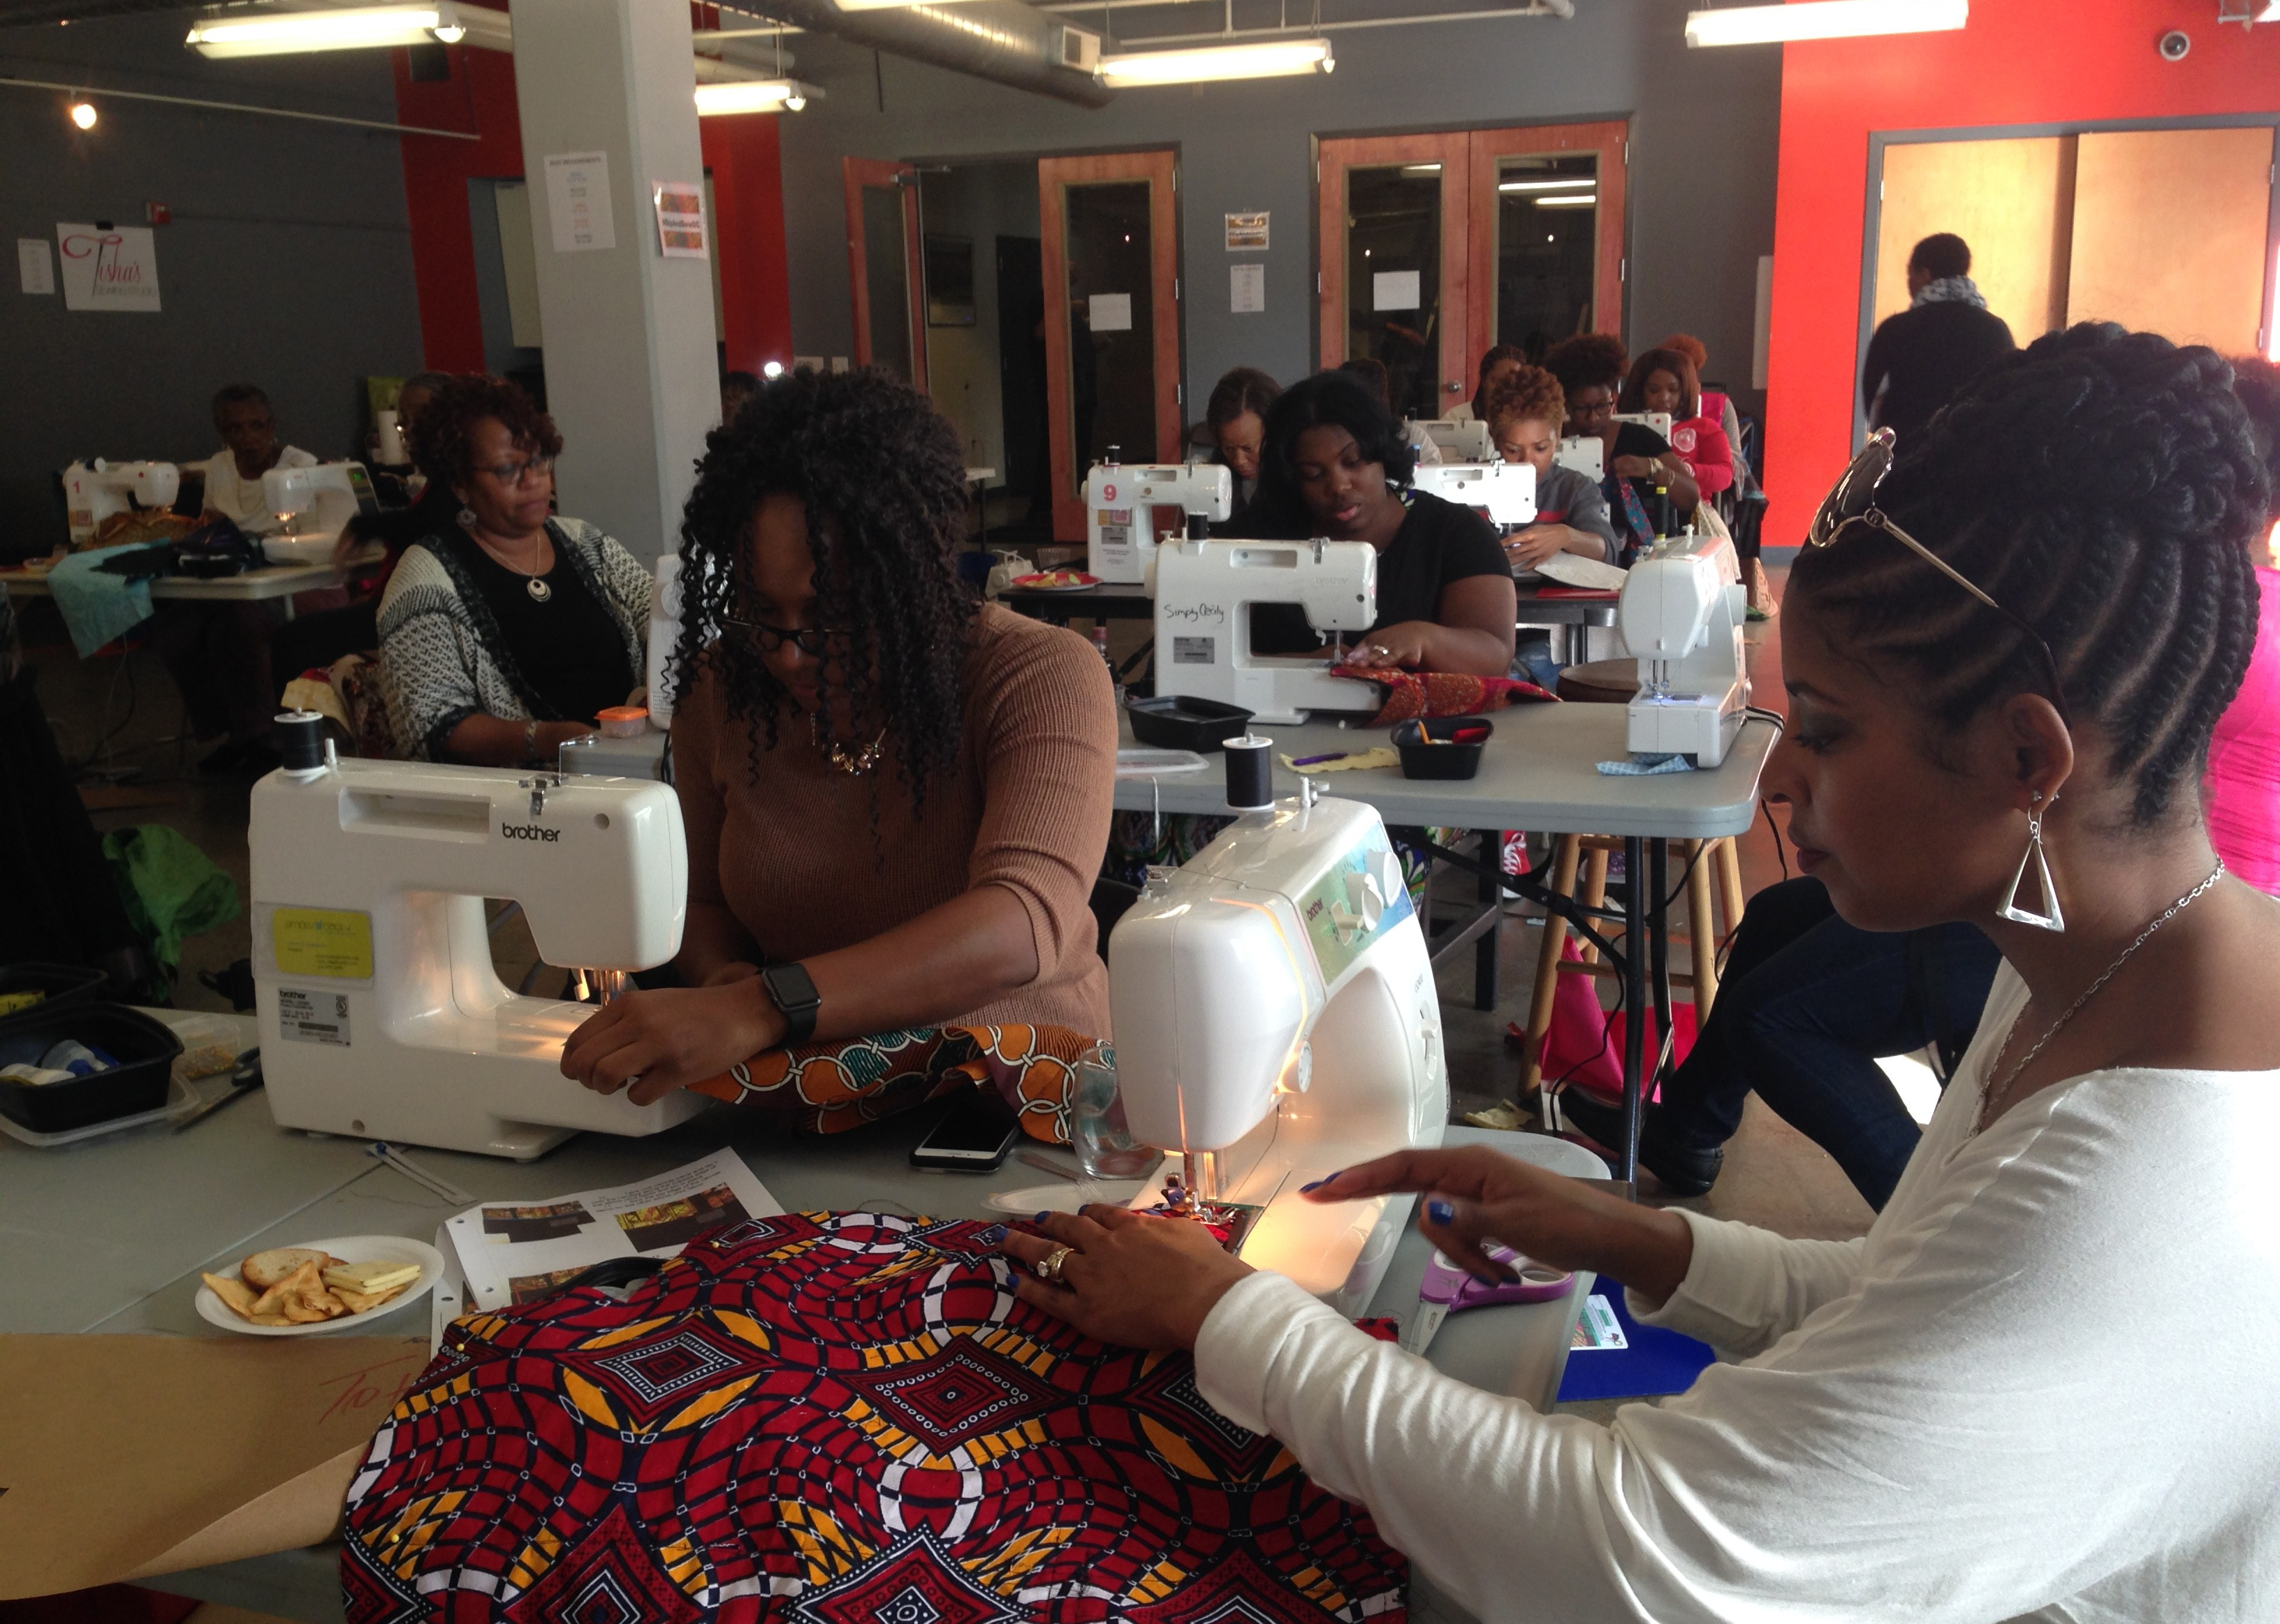 Sip and Sew DC: Building community, one stitch at a time